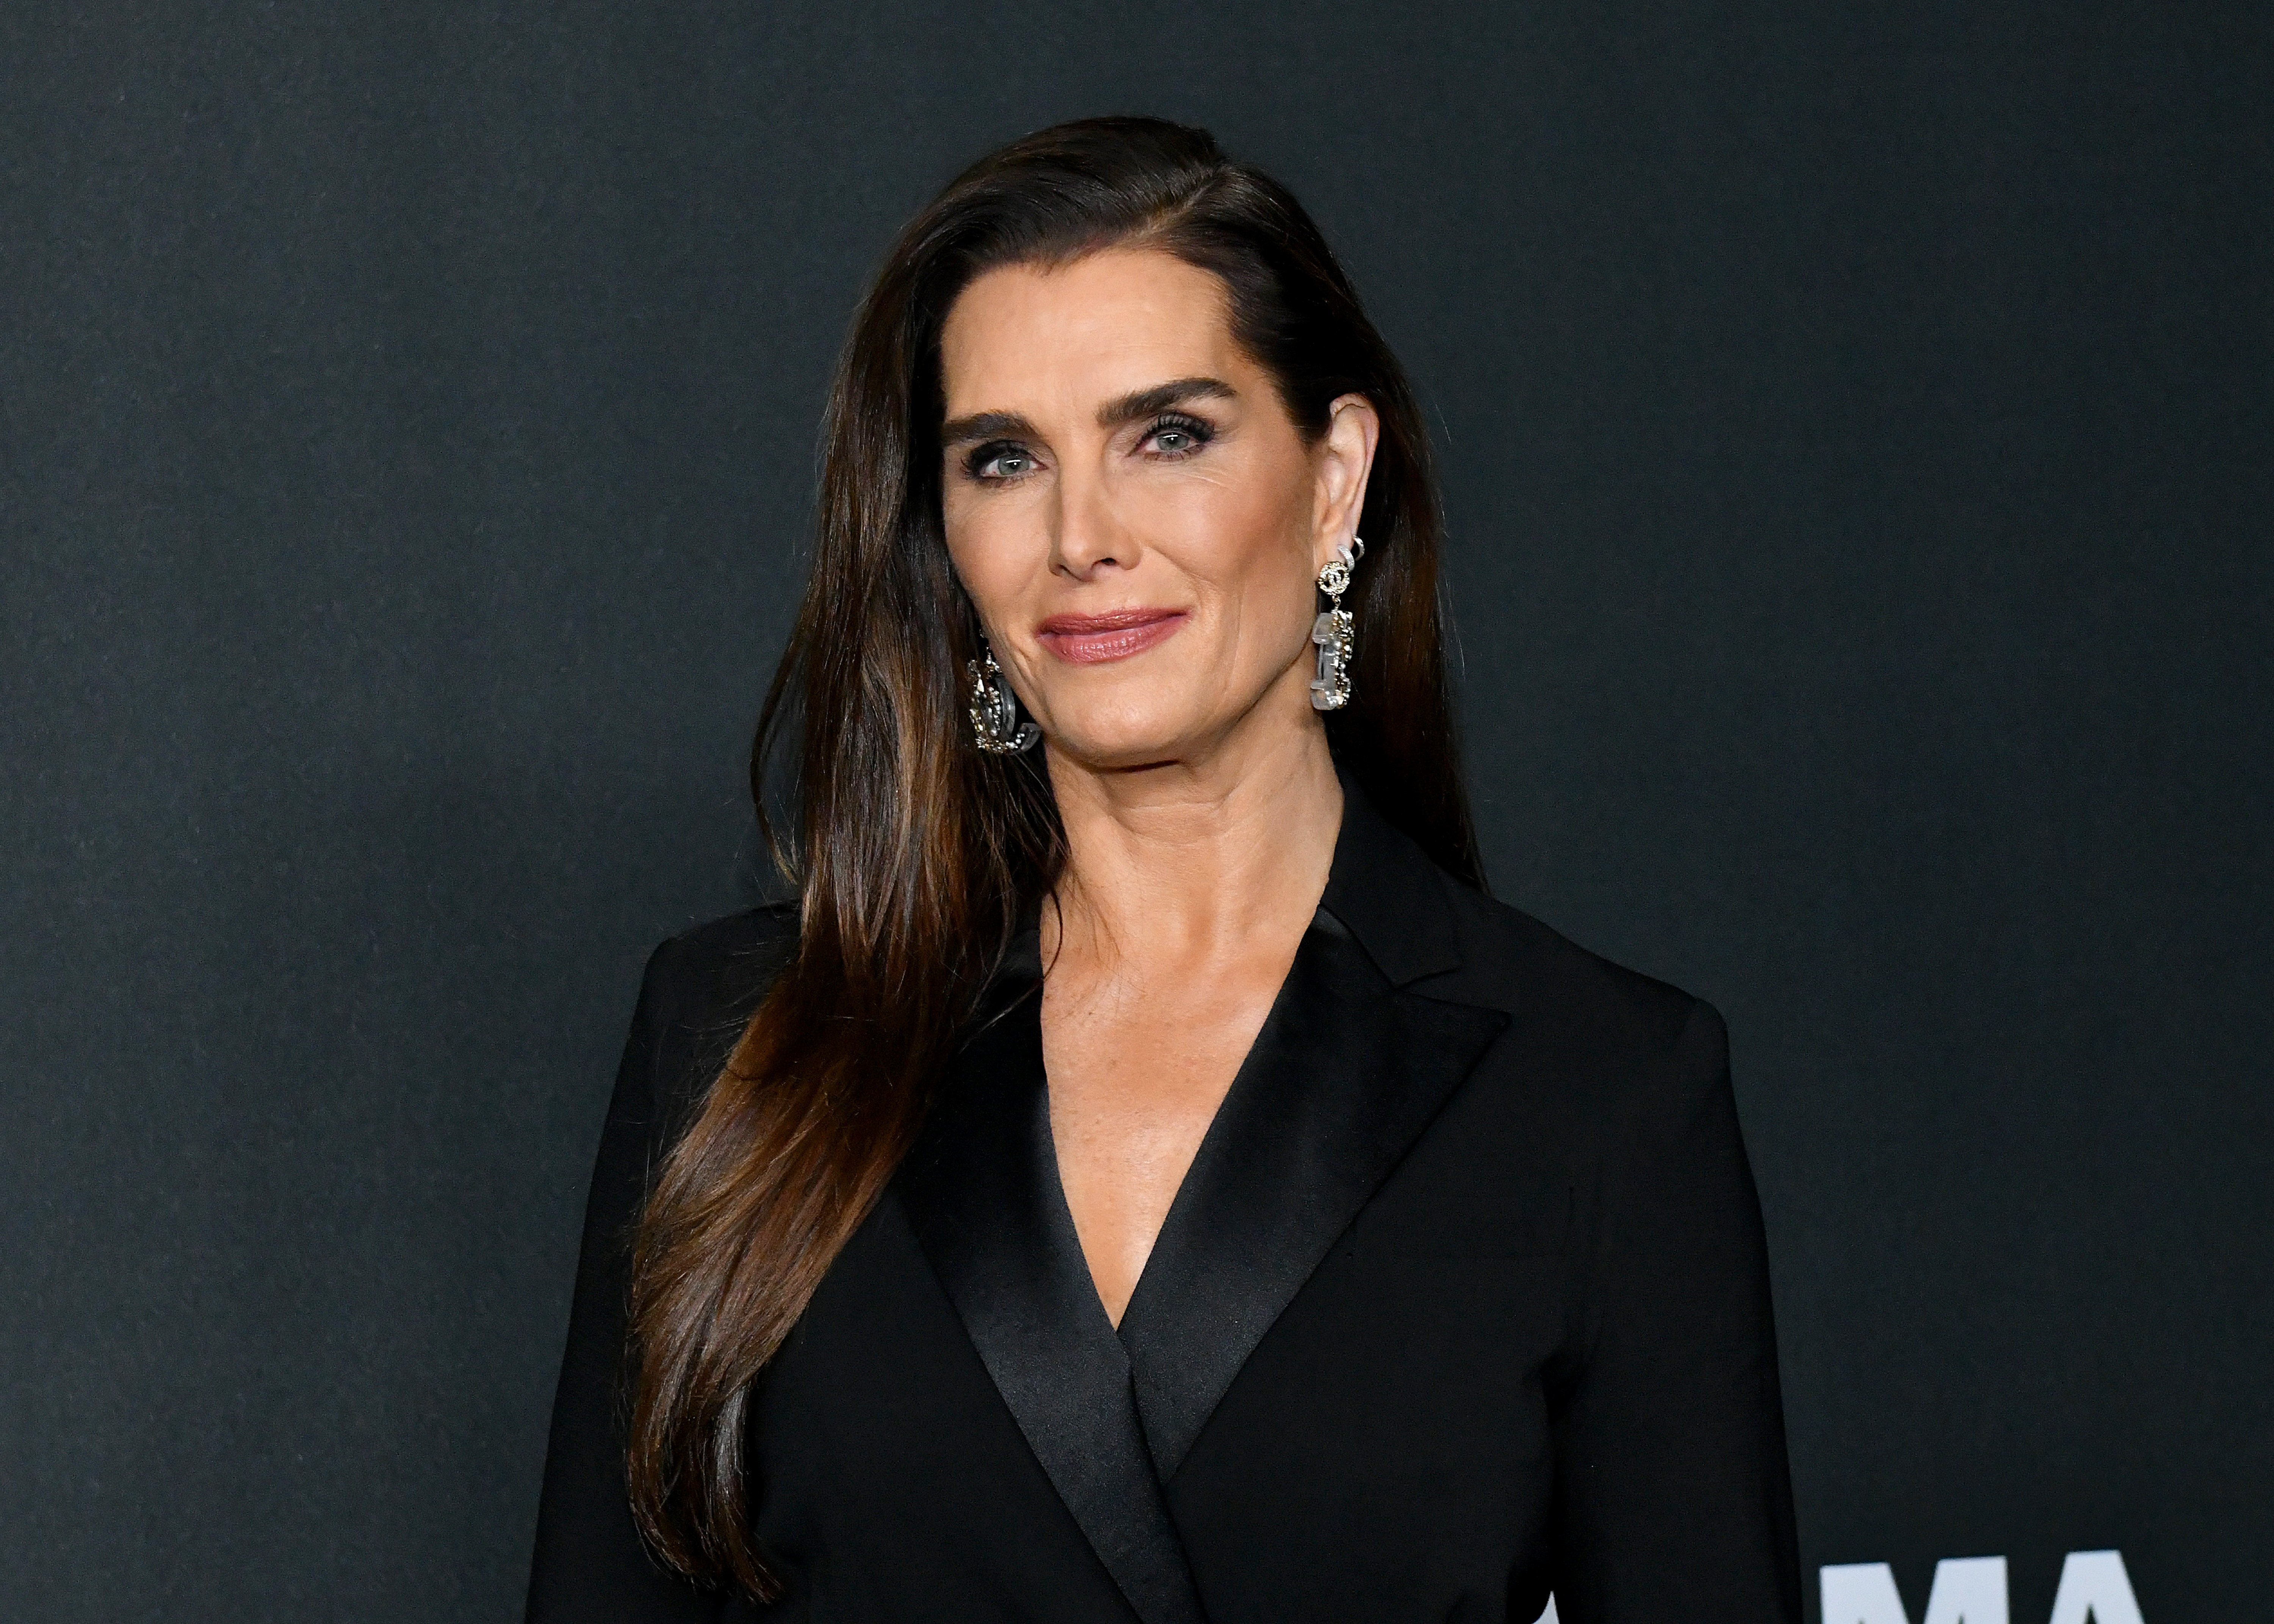 Brooke Shields attends MoMA's Twelfth Annual Film Benefit on November 12, 2019 in New York City. | Photo: Getty Images